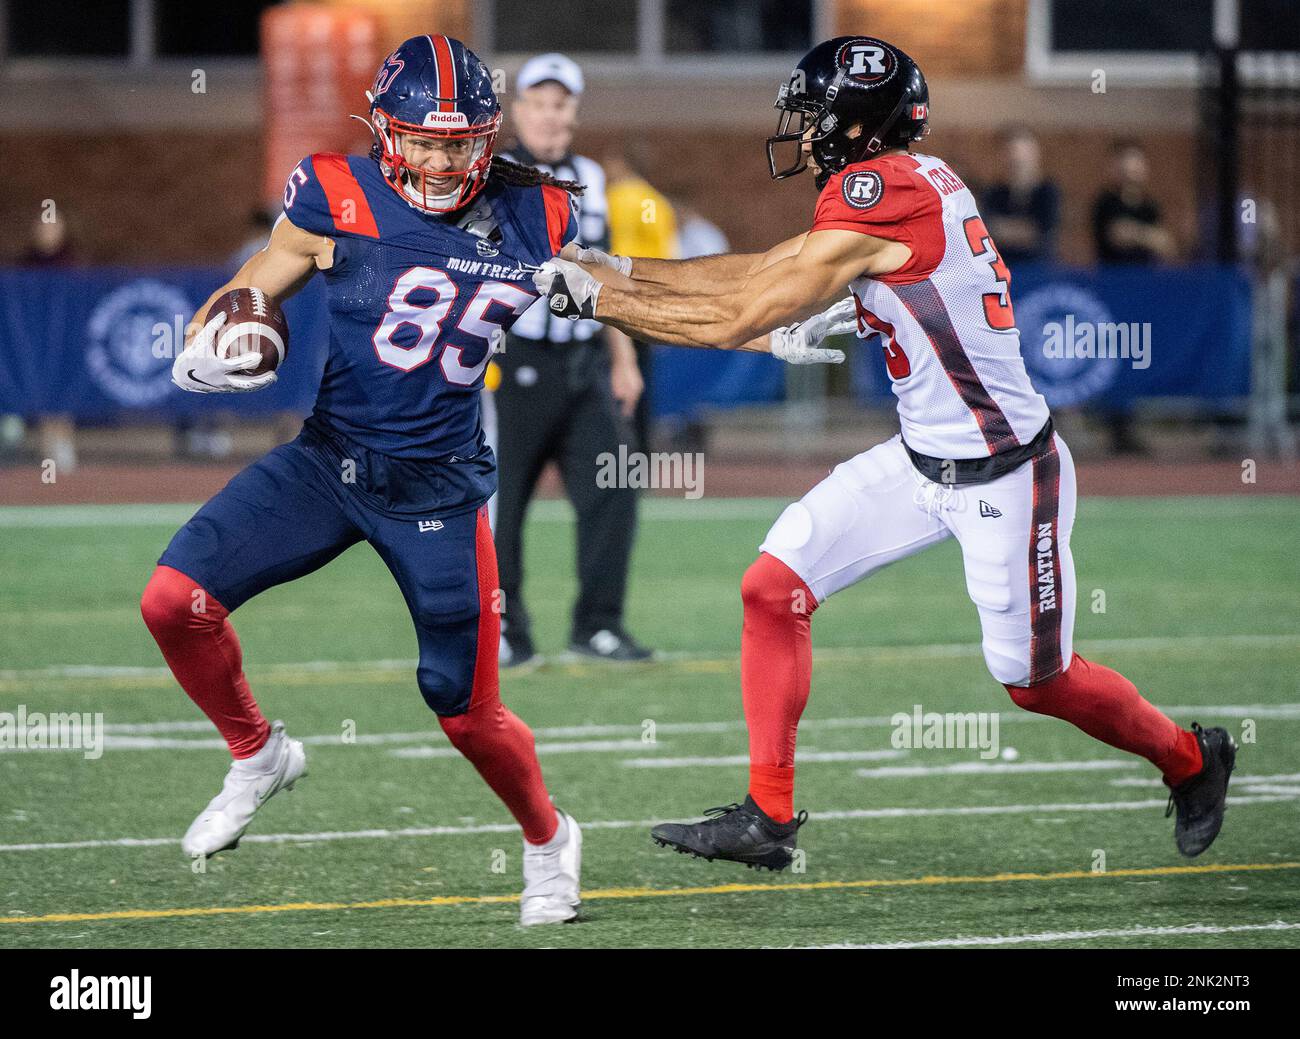 Montreal Alouettes wide receiver Krishawn Hogan (85) holds off a